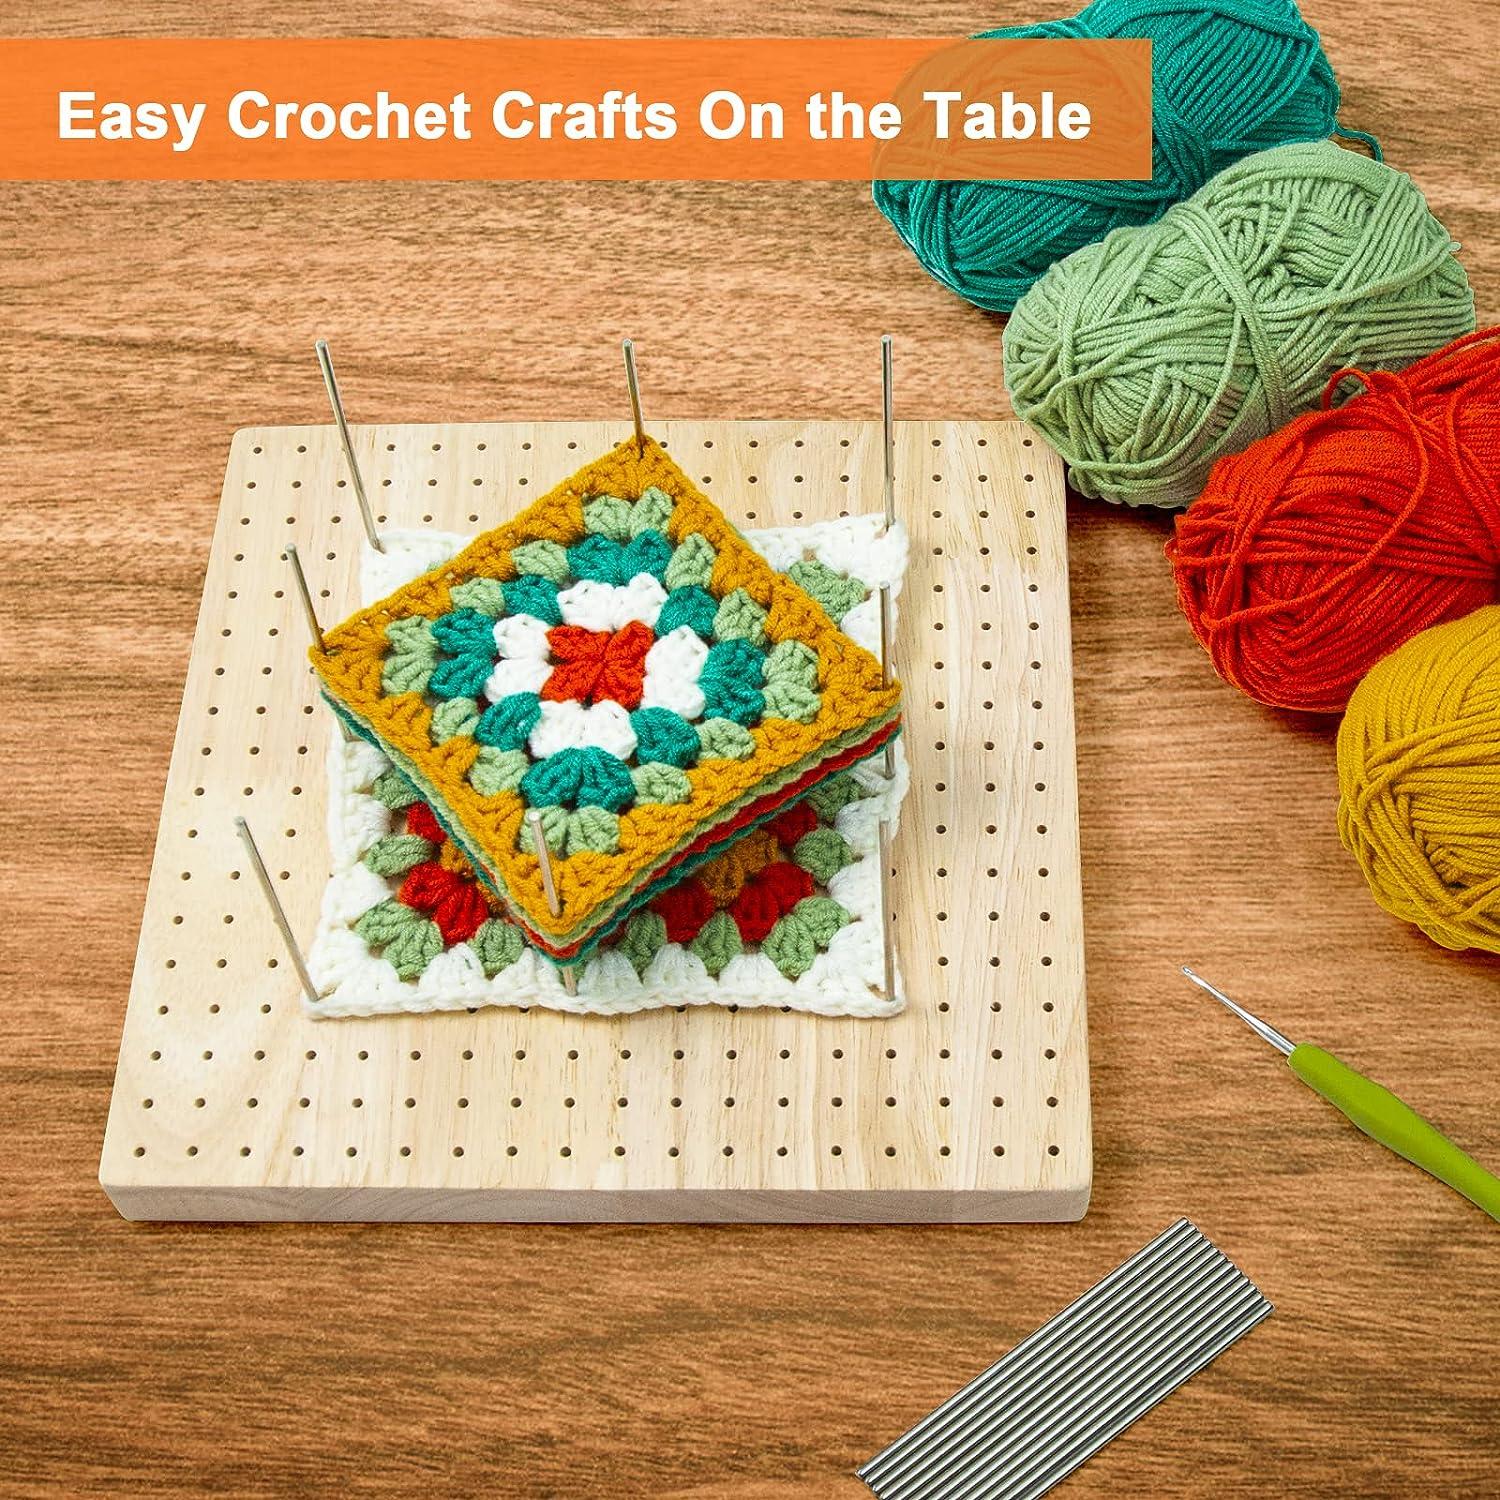 There are different ways to utilize a blocking board for #grannysquare, Crochet